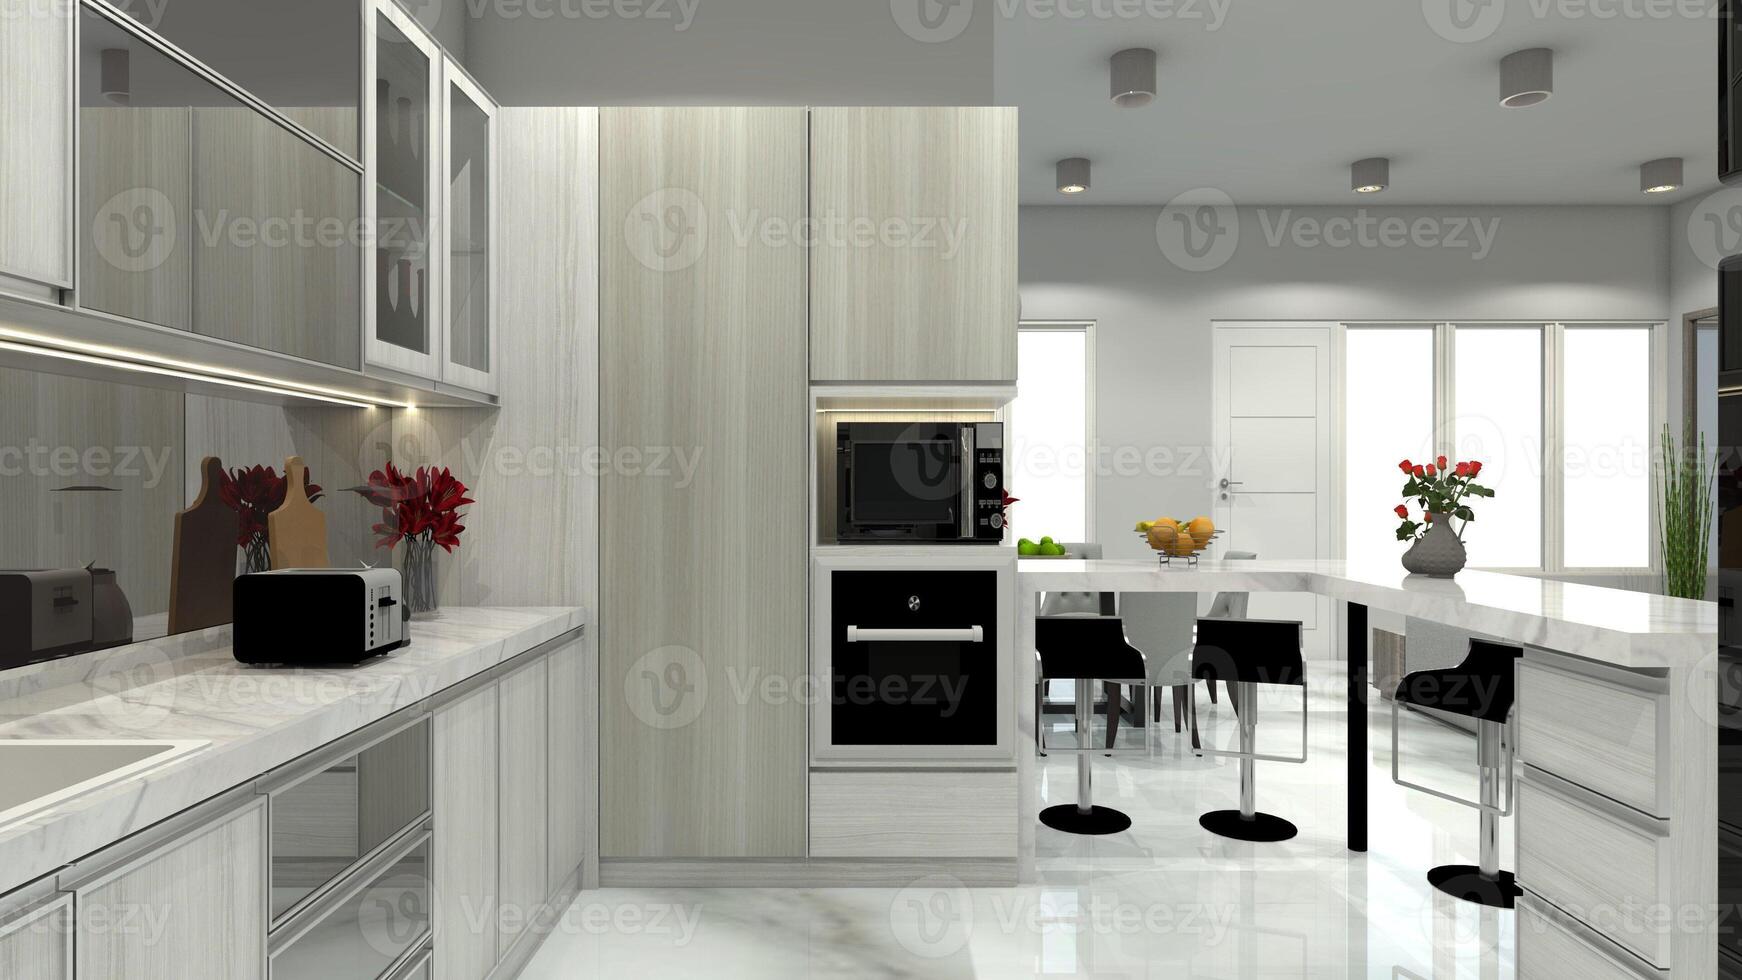 Modern Oven and Microwave Cabinet for Interior Kitchen, 3D Illustration photo